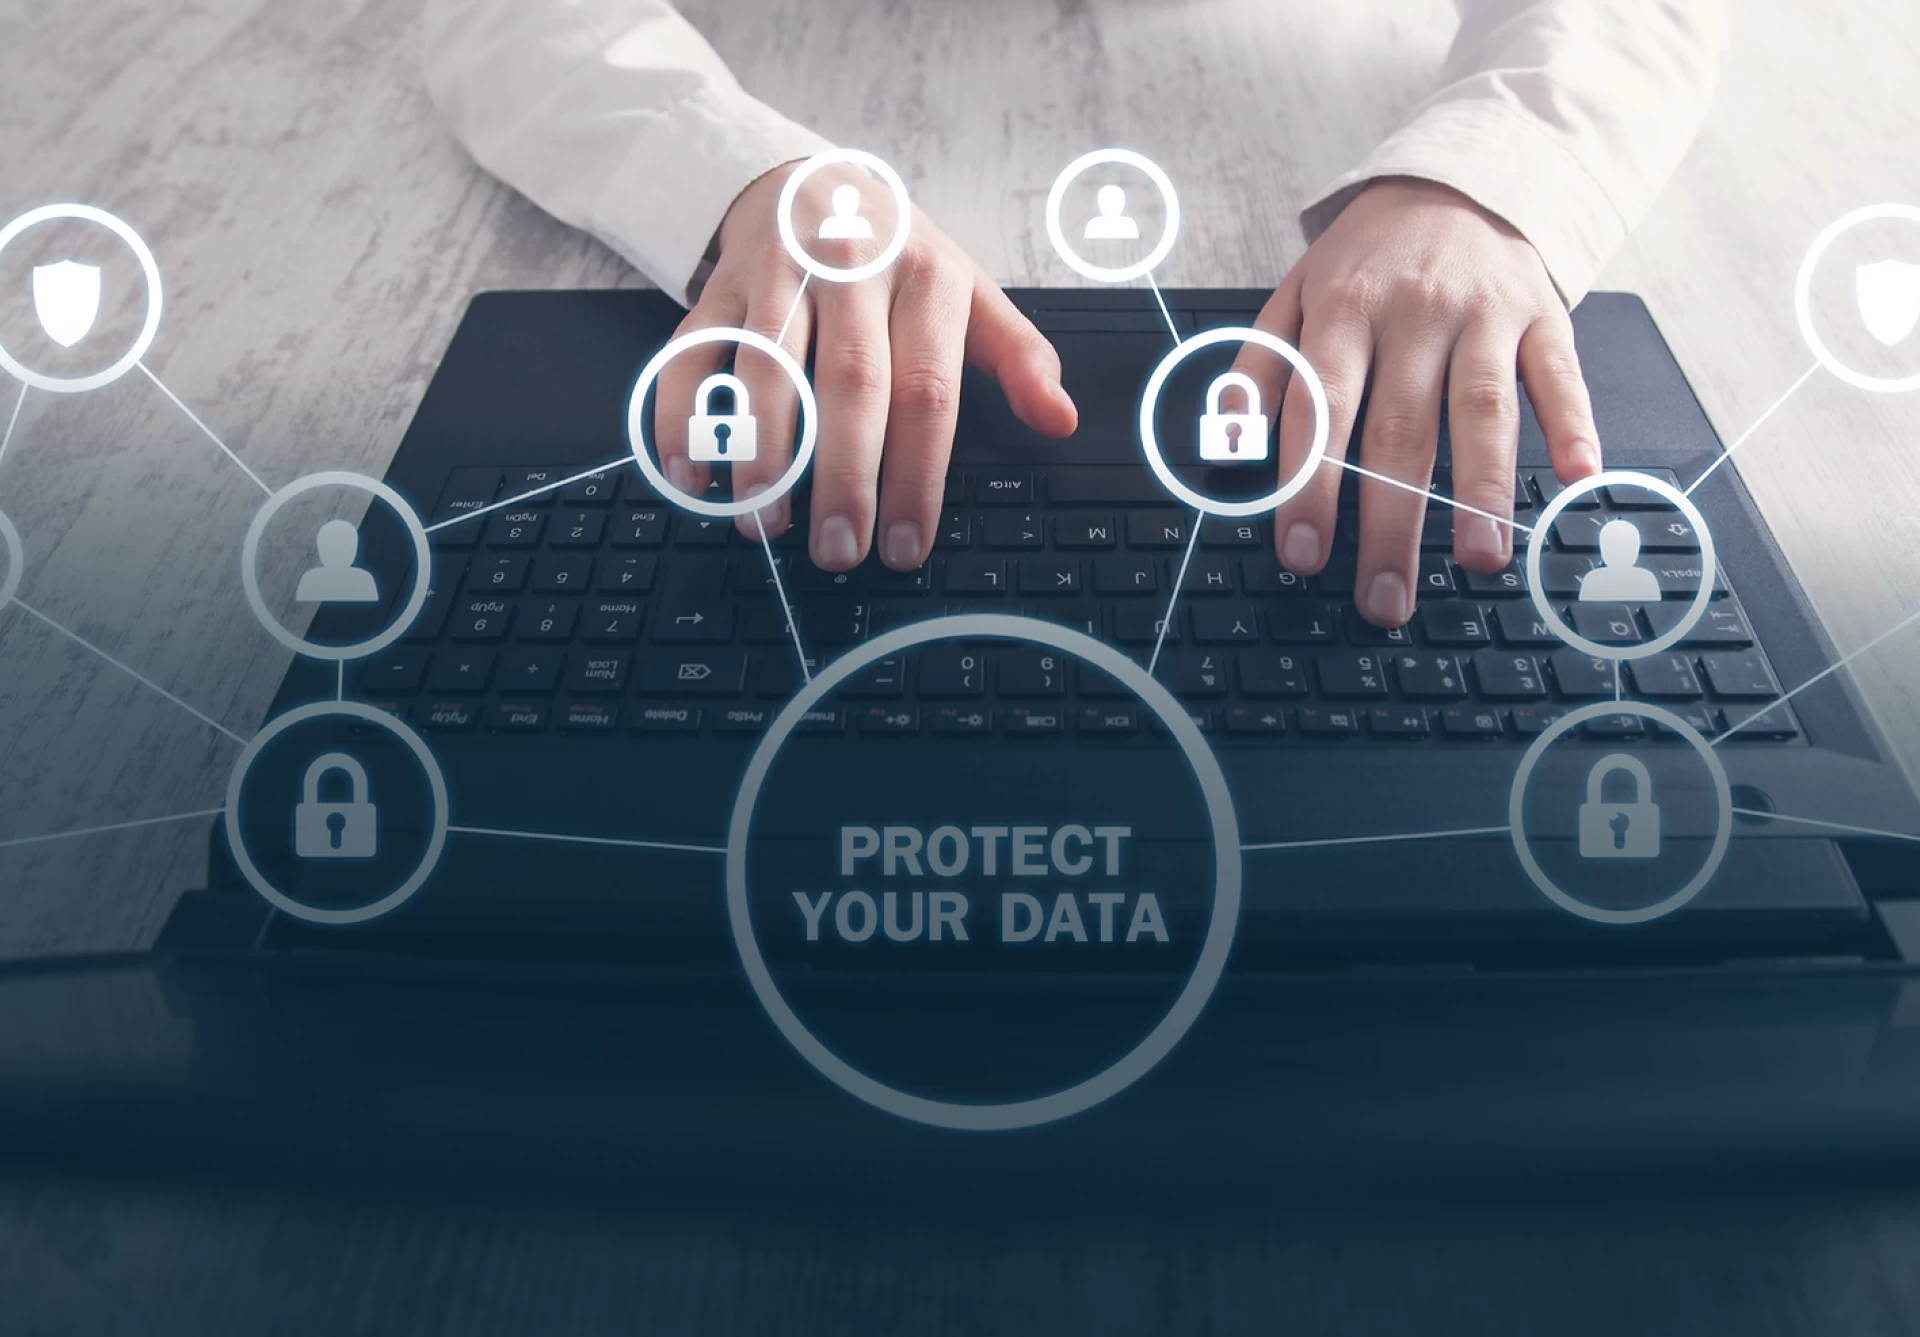 Picking the right framework for your Data Privacy and Protection Program